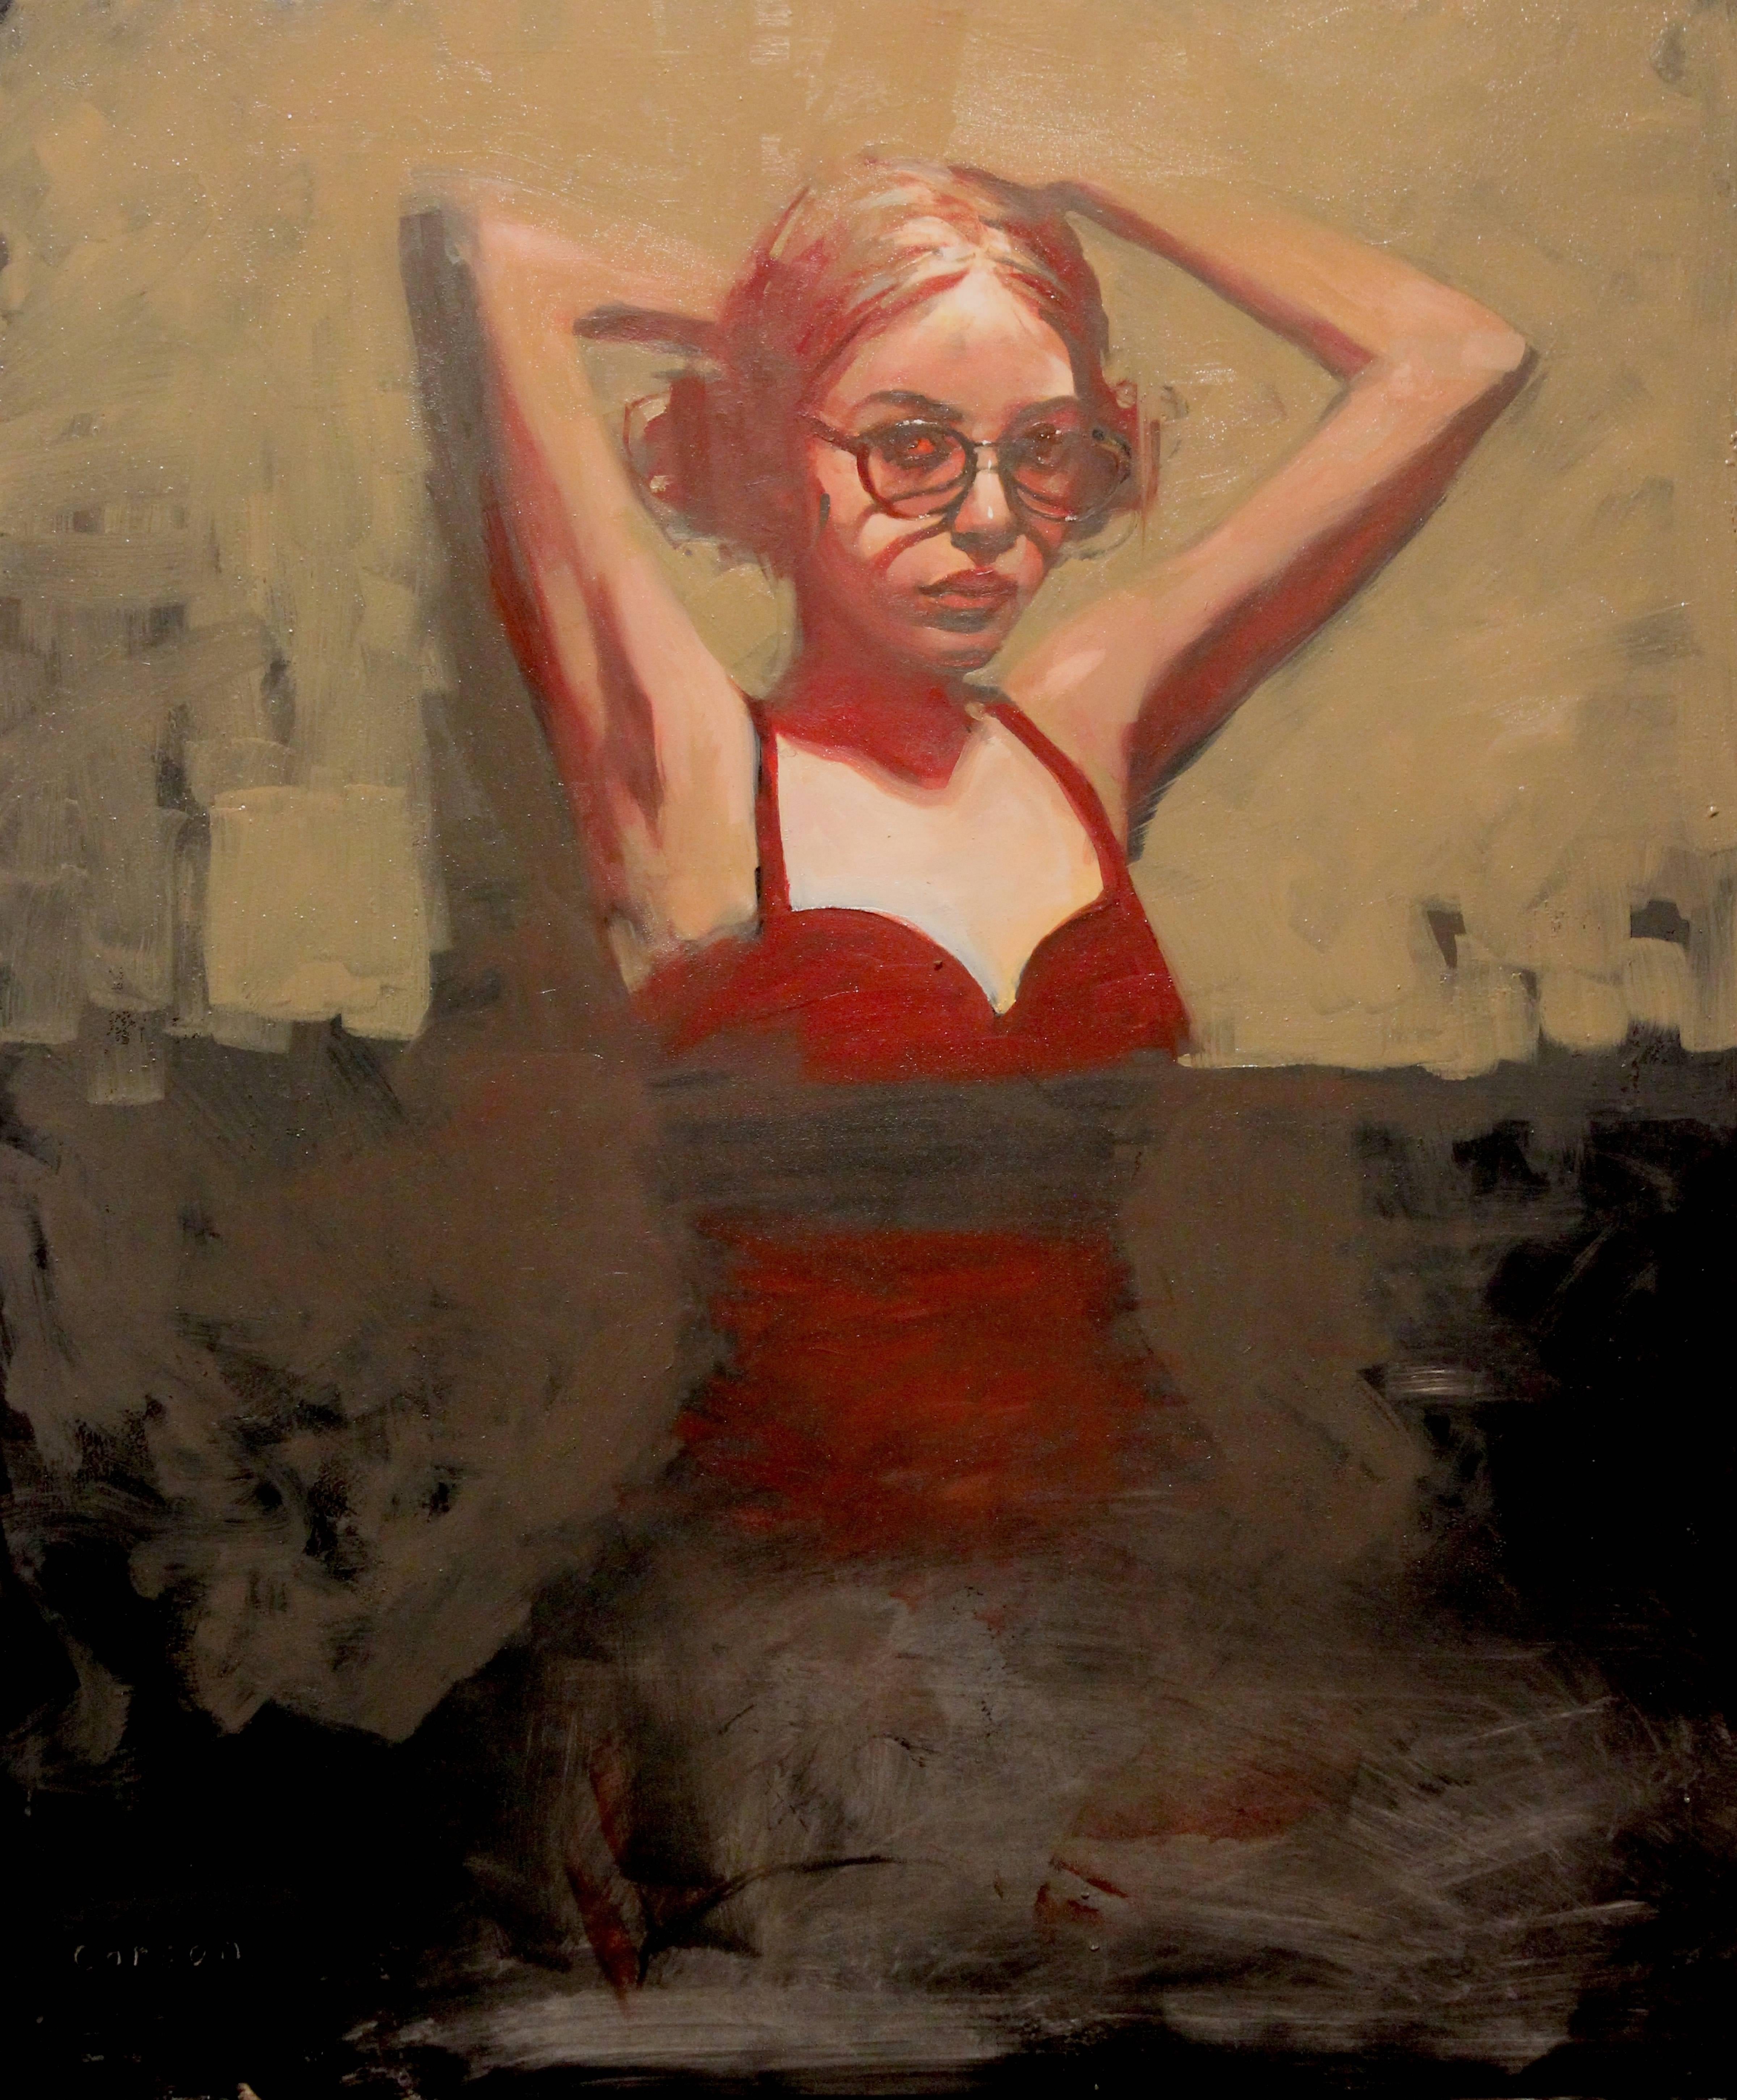 Michael Carson Figurative Painting - "Rose Colored Glasses"